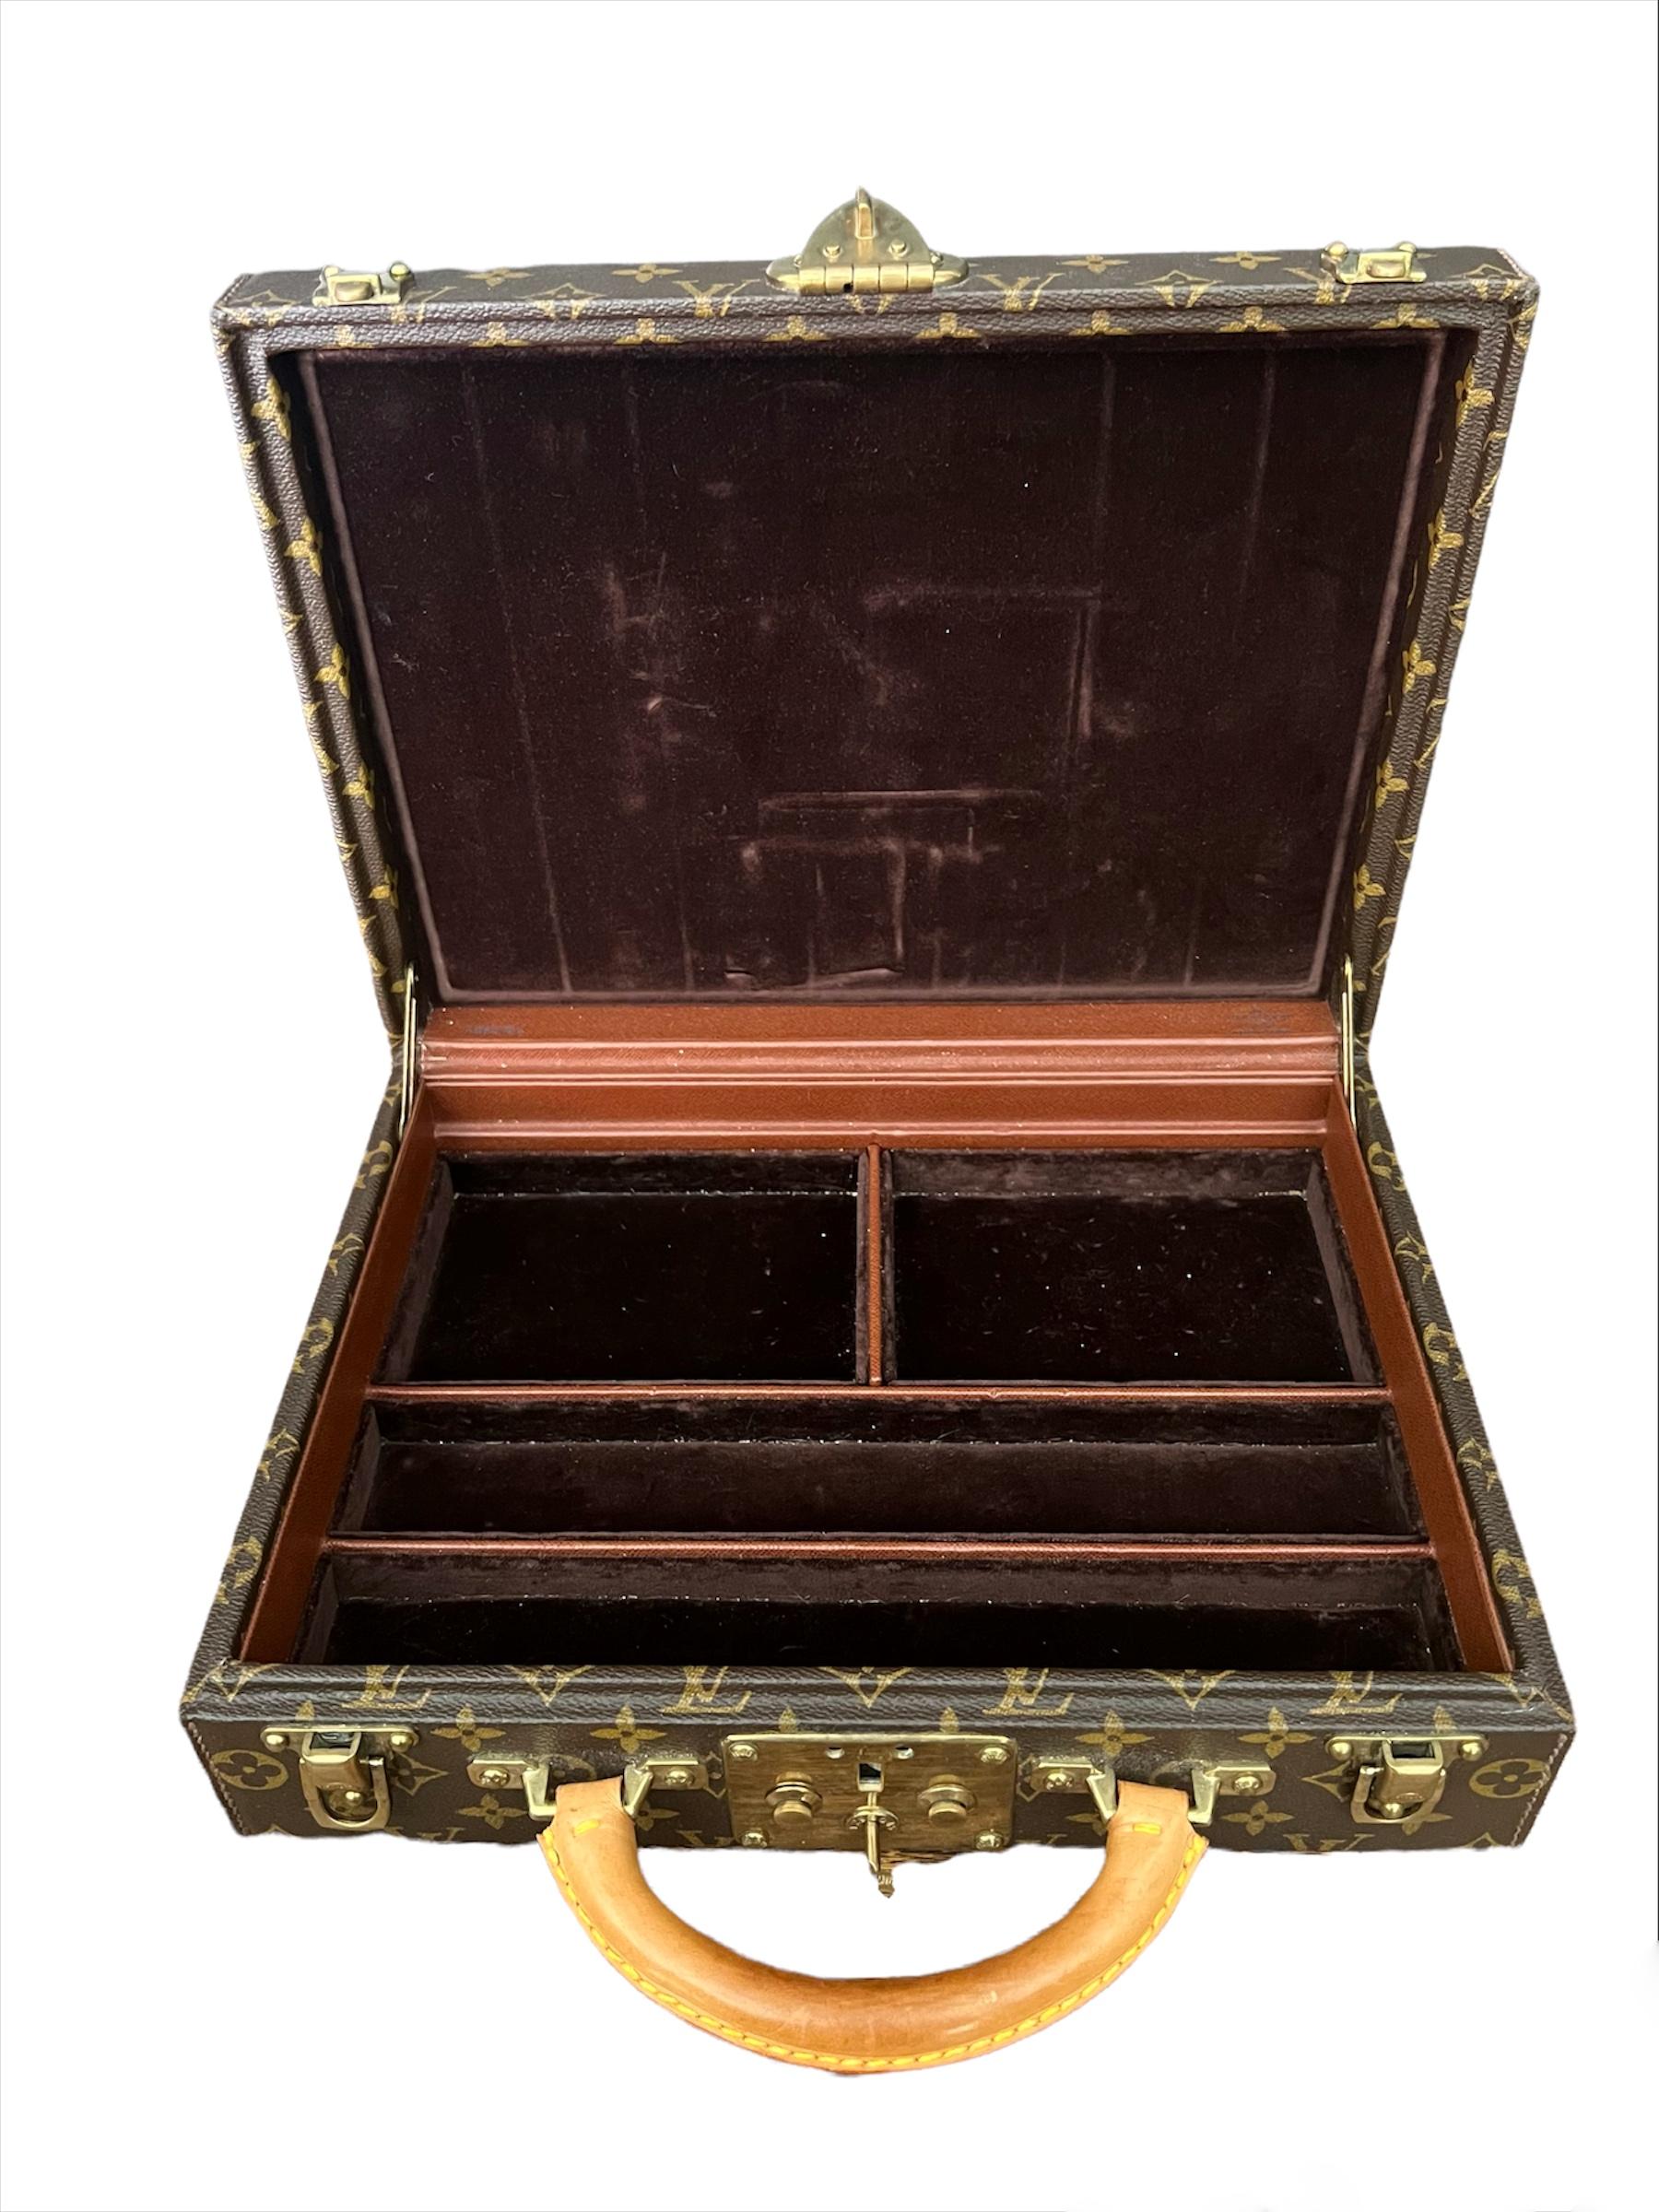 Vintage Louis Vuitton Boite Bijoux Jewelry Travel Trunk Case In Good Condition For Sale In Beverly Hills, CA